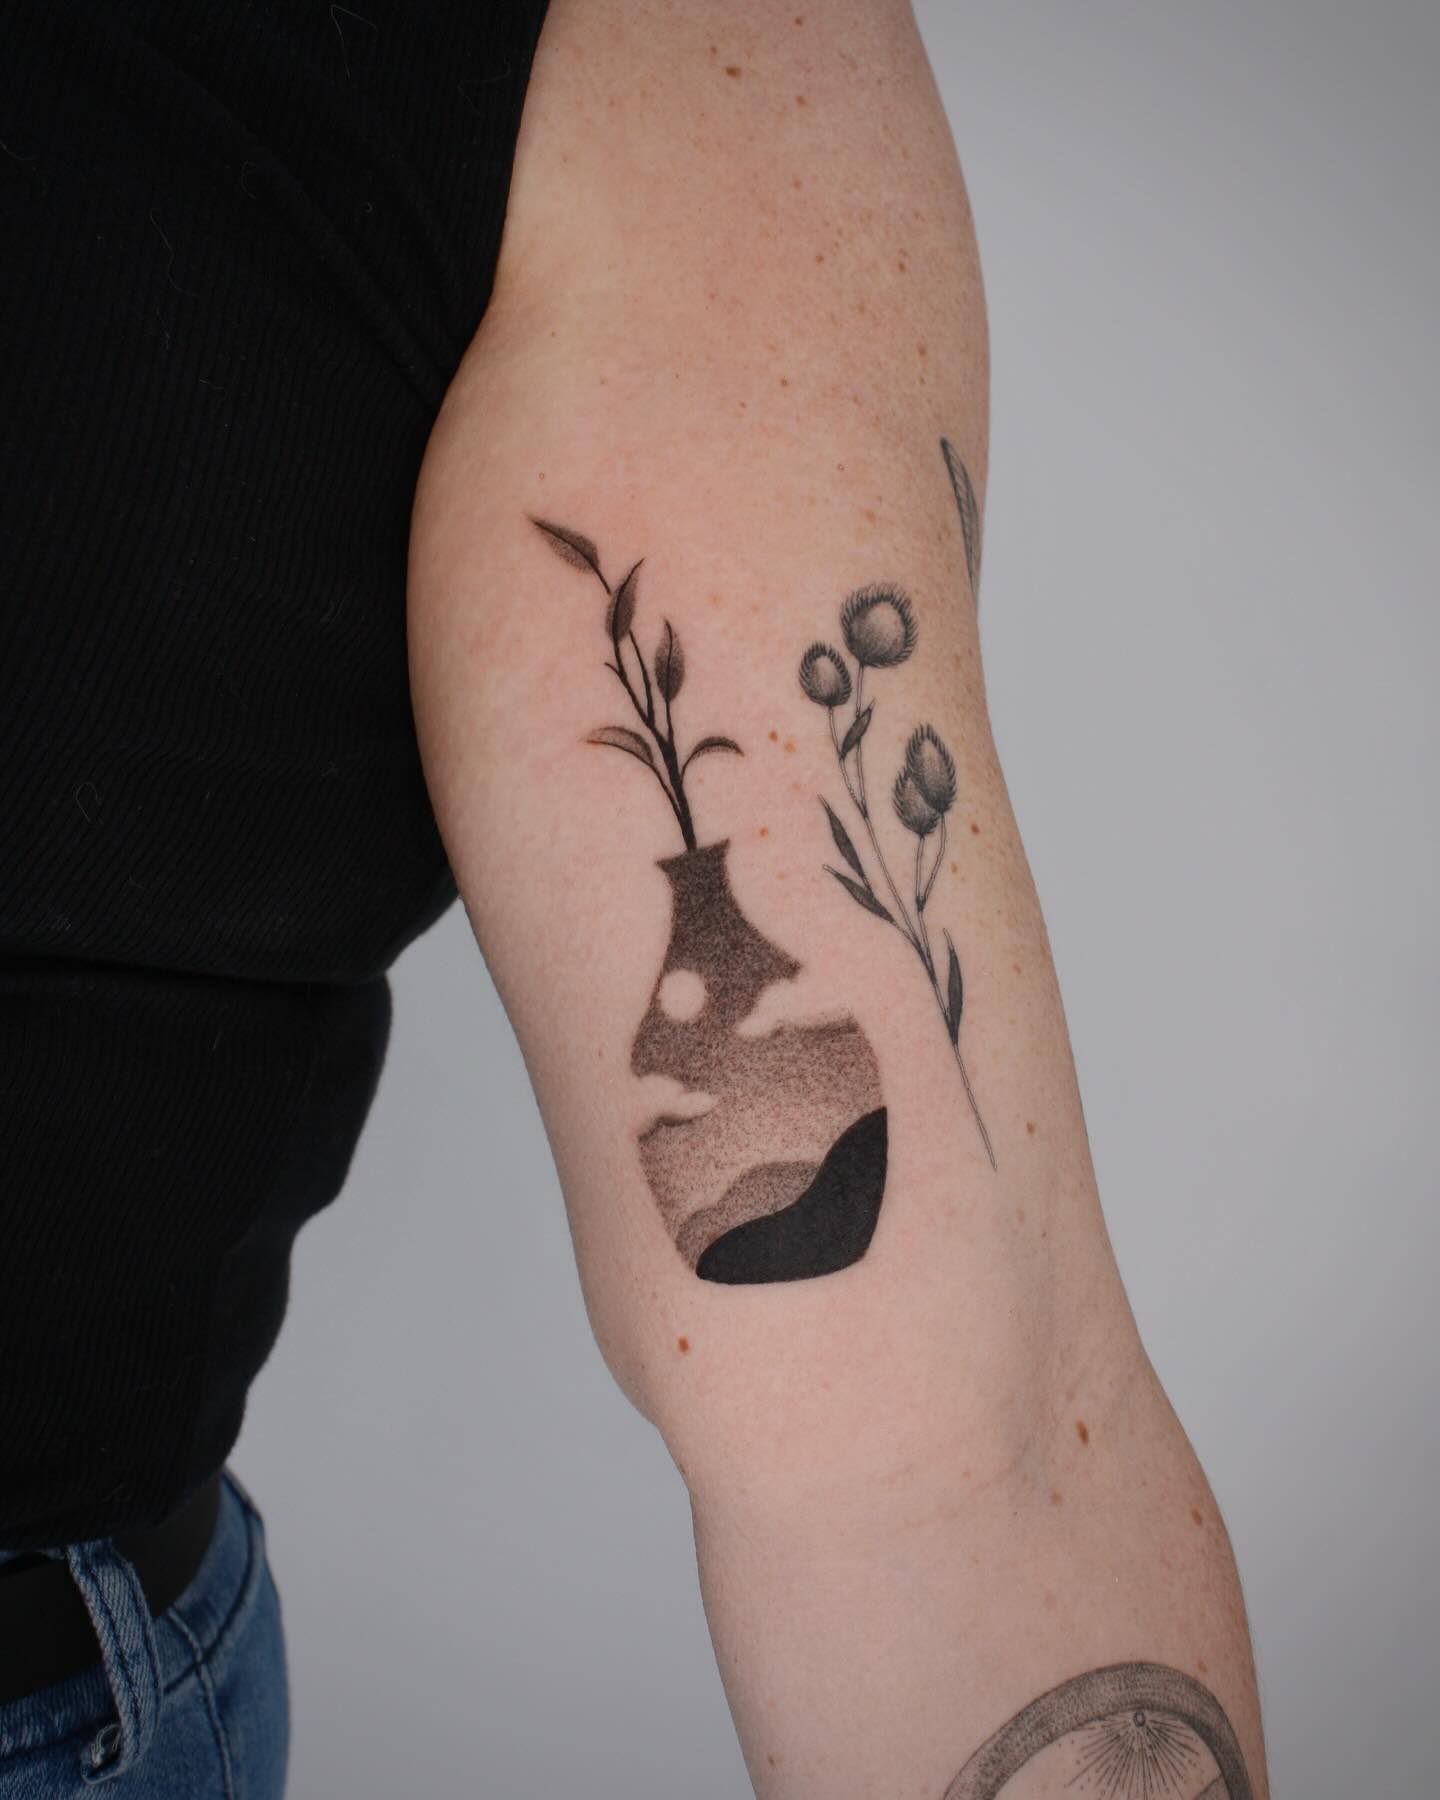 Minimalistic vase tattoo by ginseng.ink